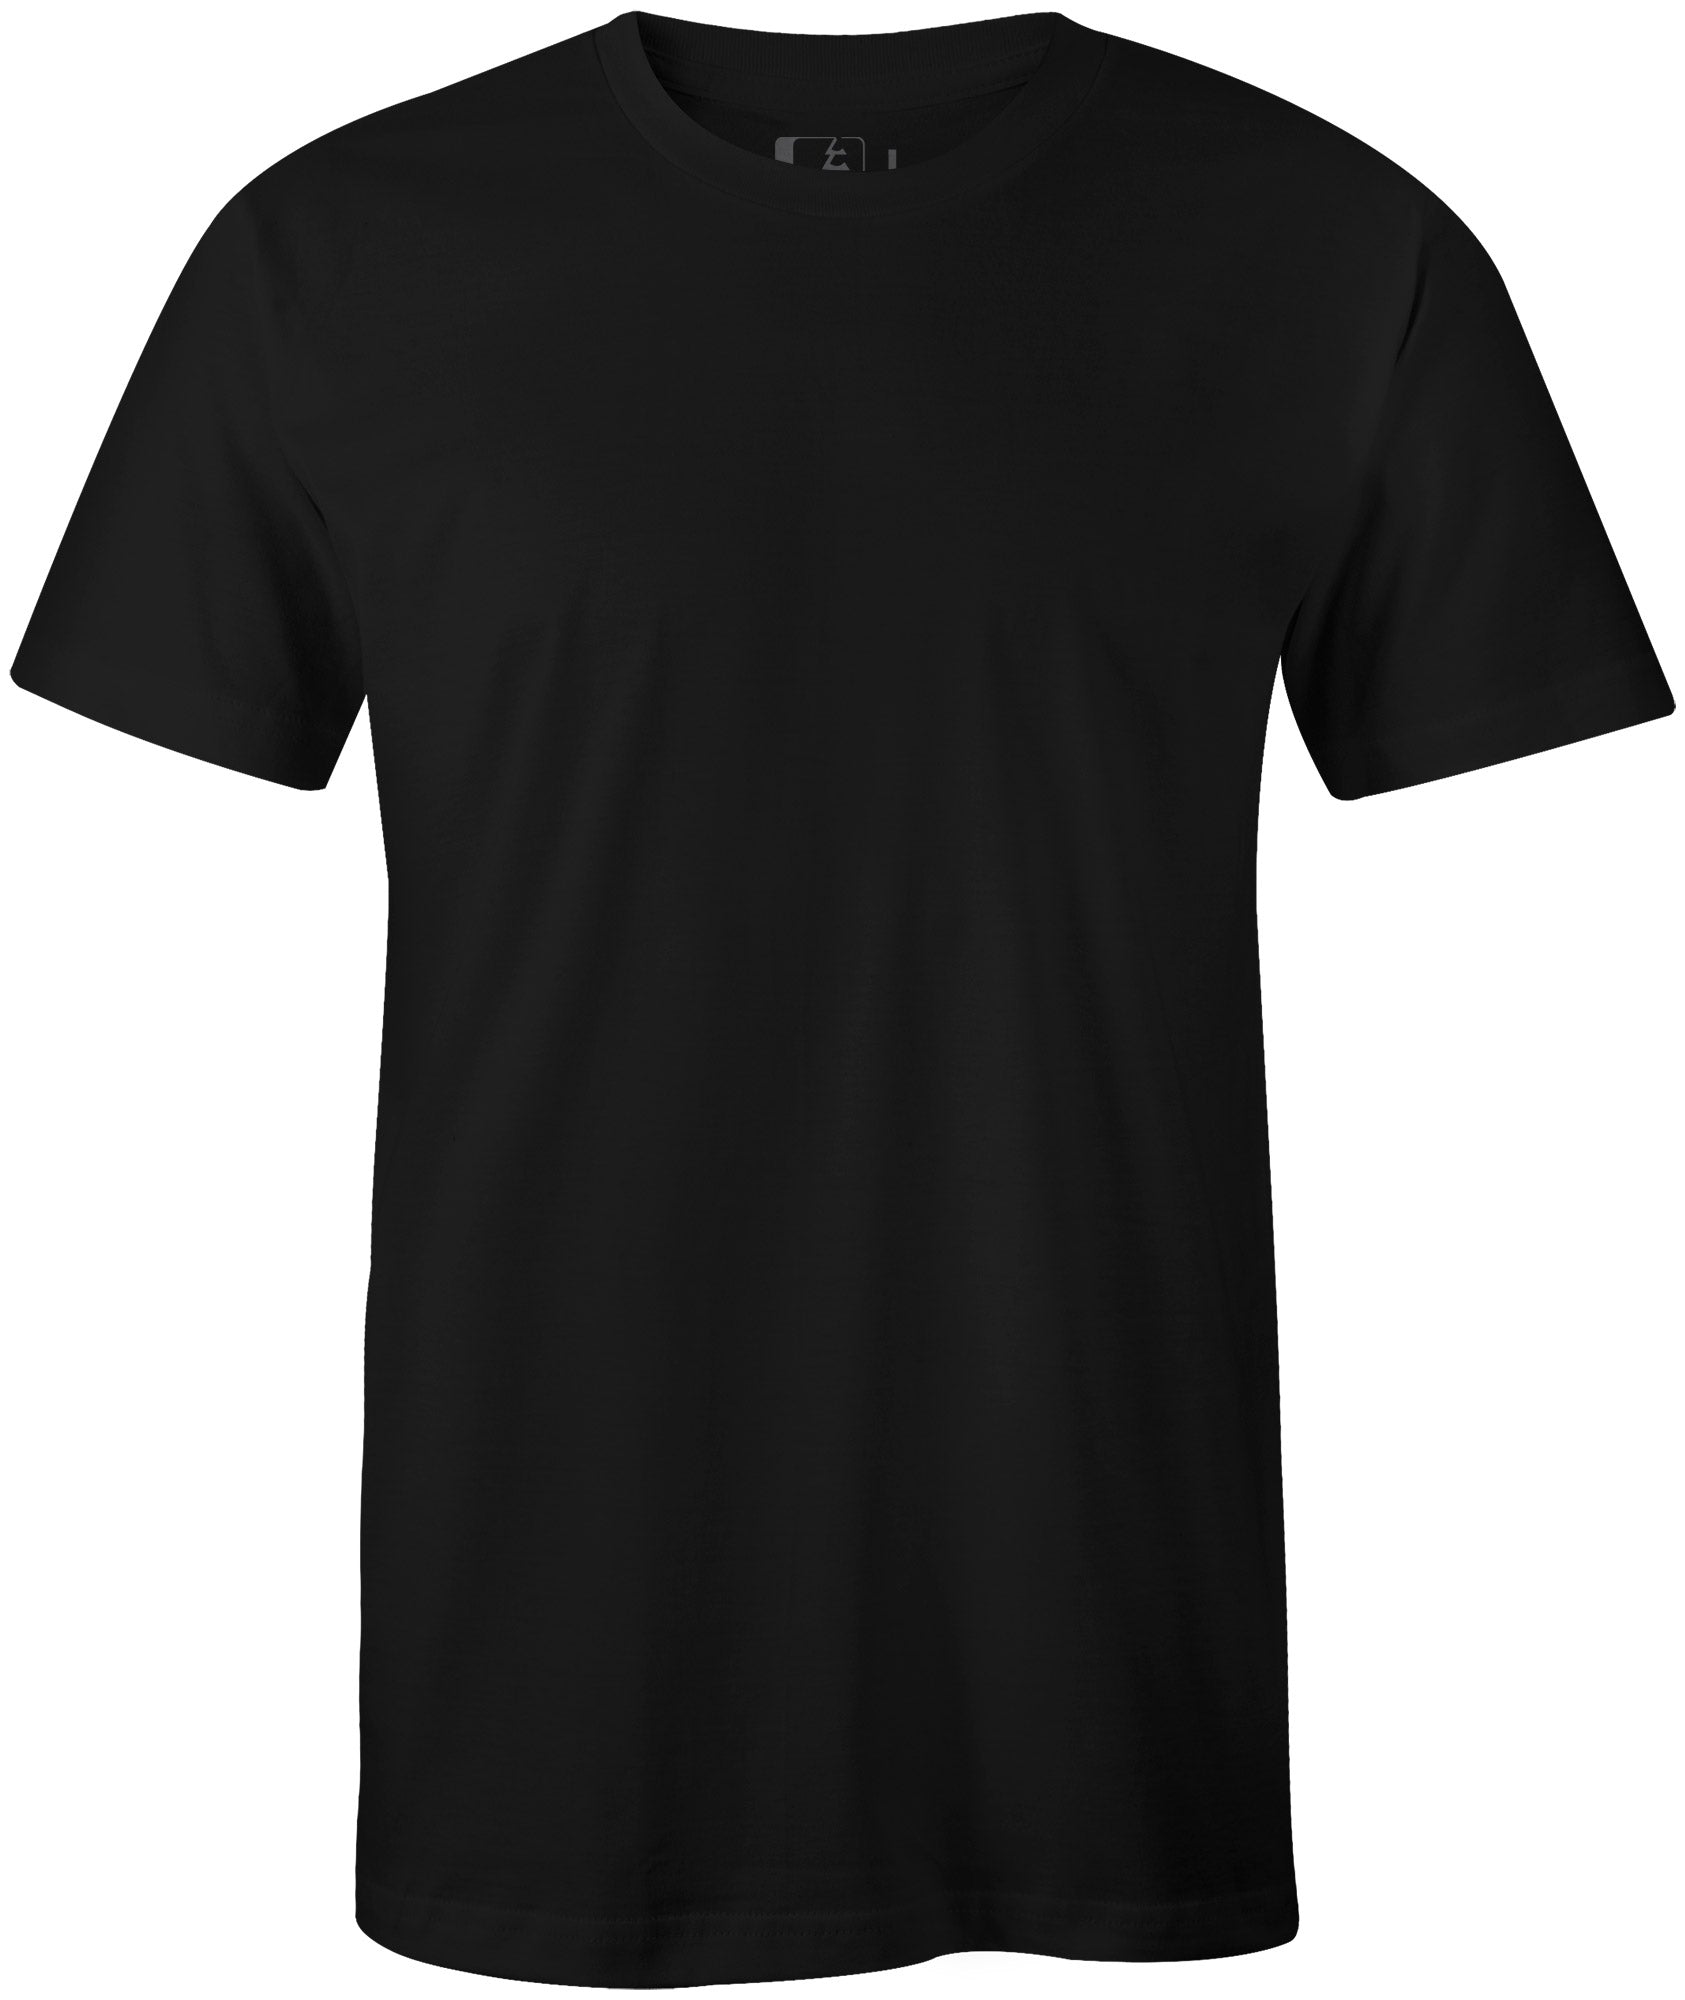 black t shirt front and back